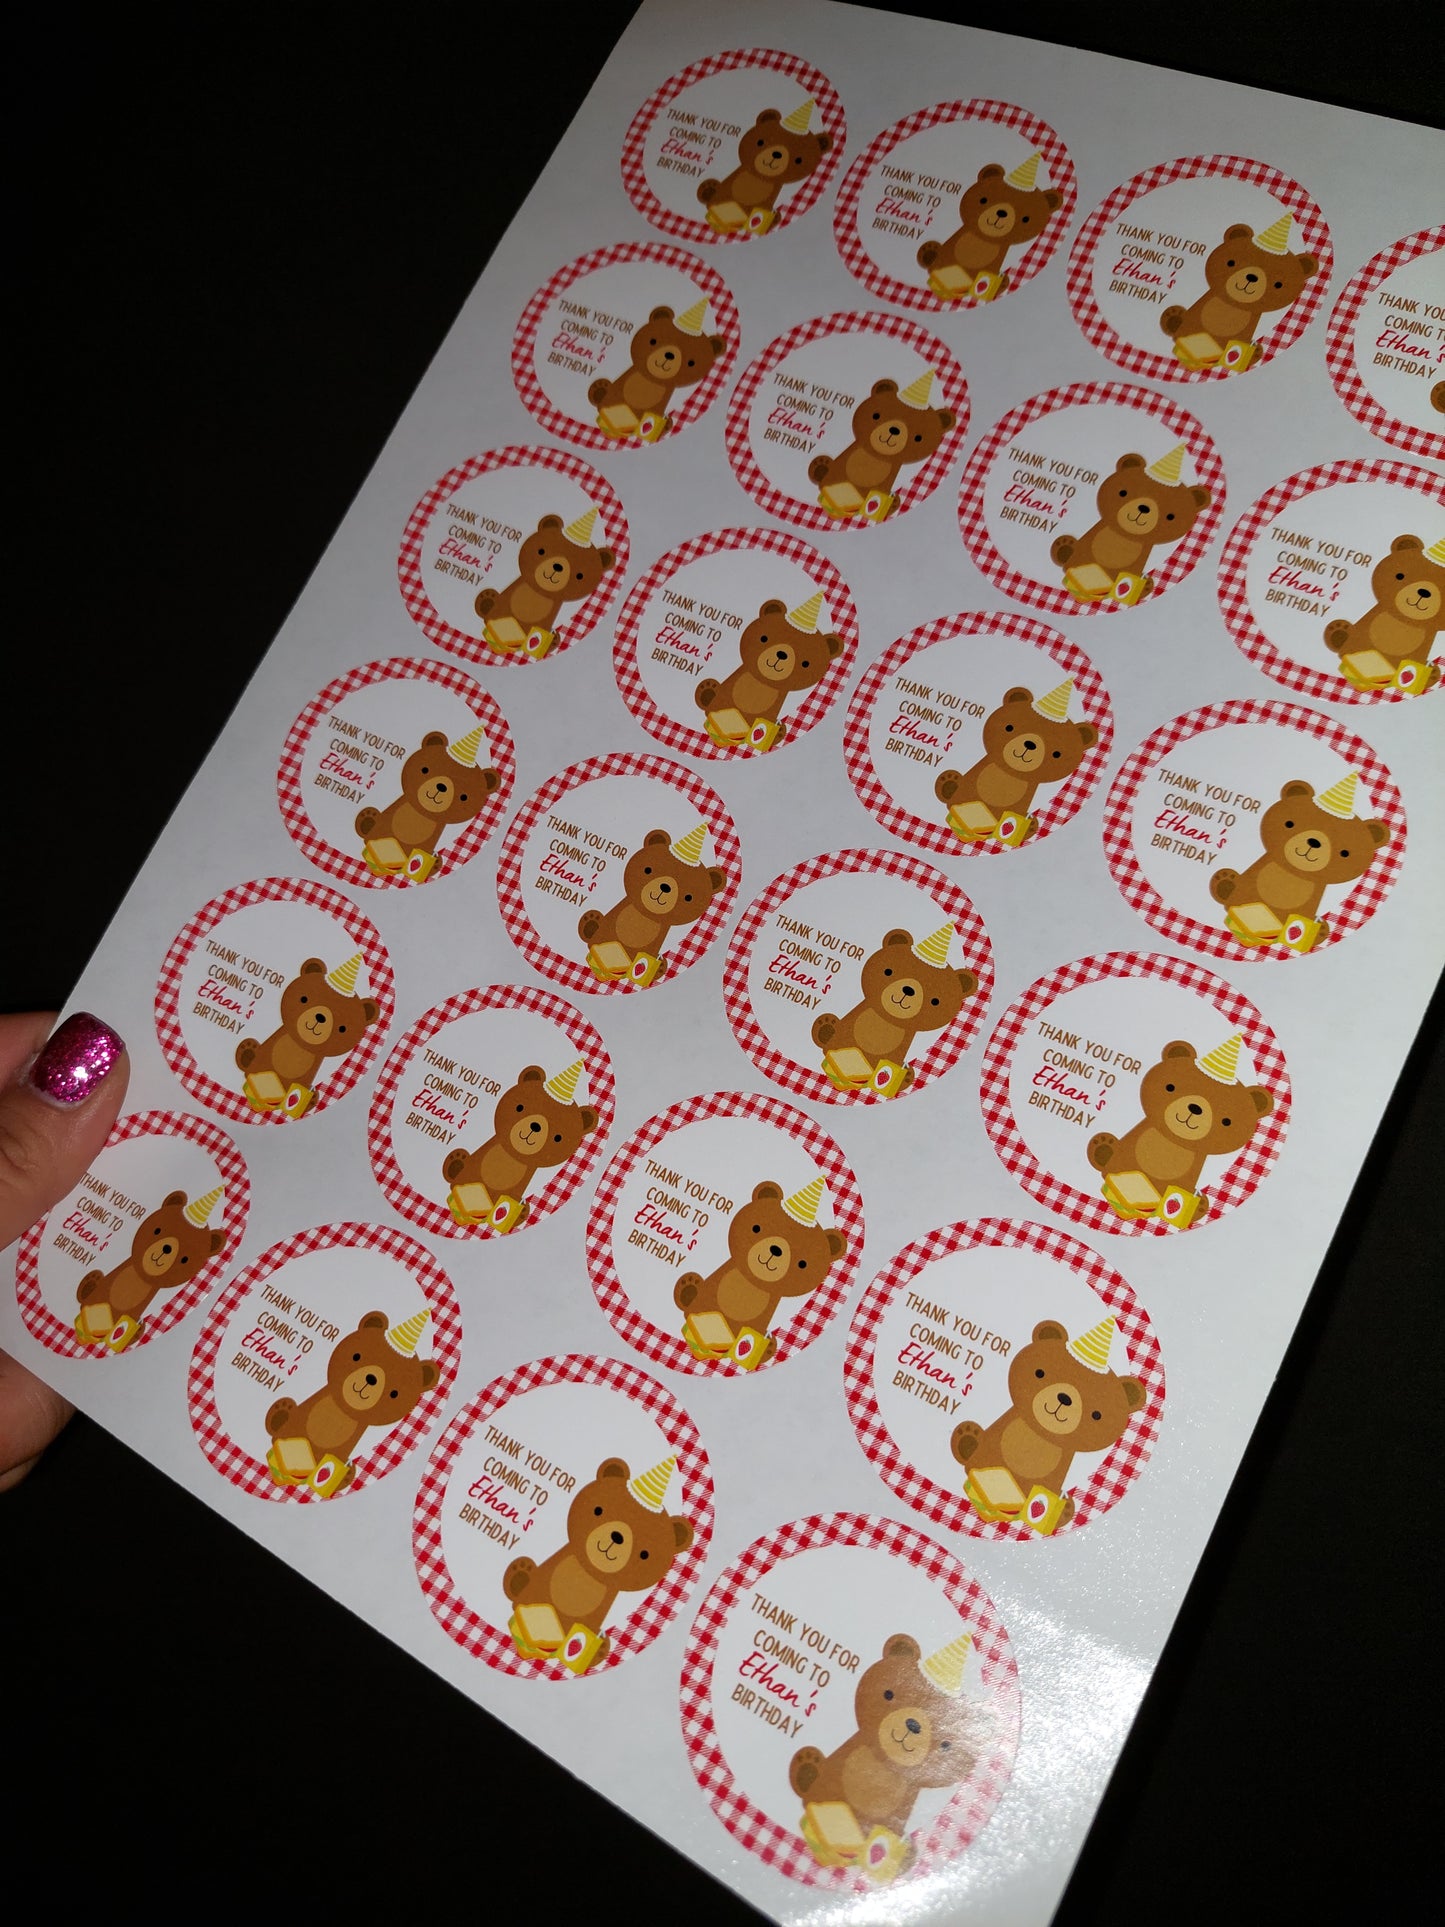 Red Teddy Bear Picnic Party Stickers | Circle Stickers | Sticker Sheet | Party Stickers